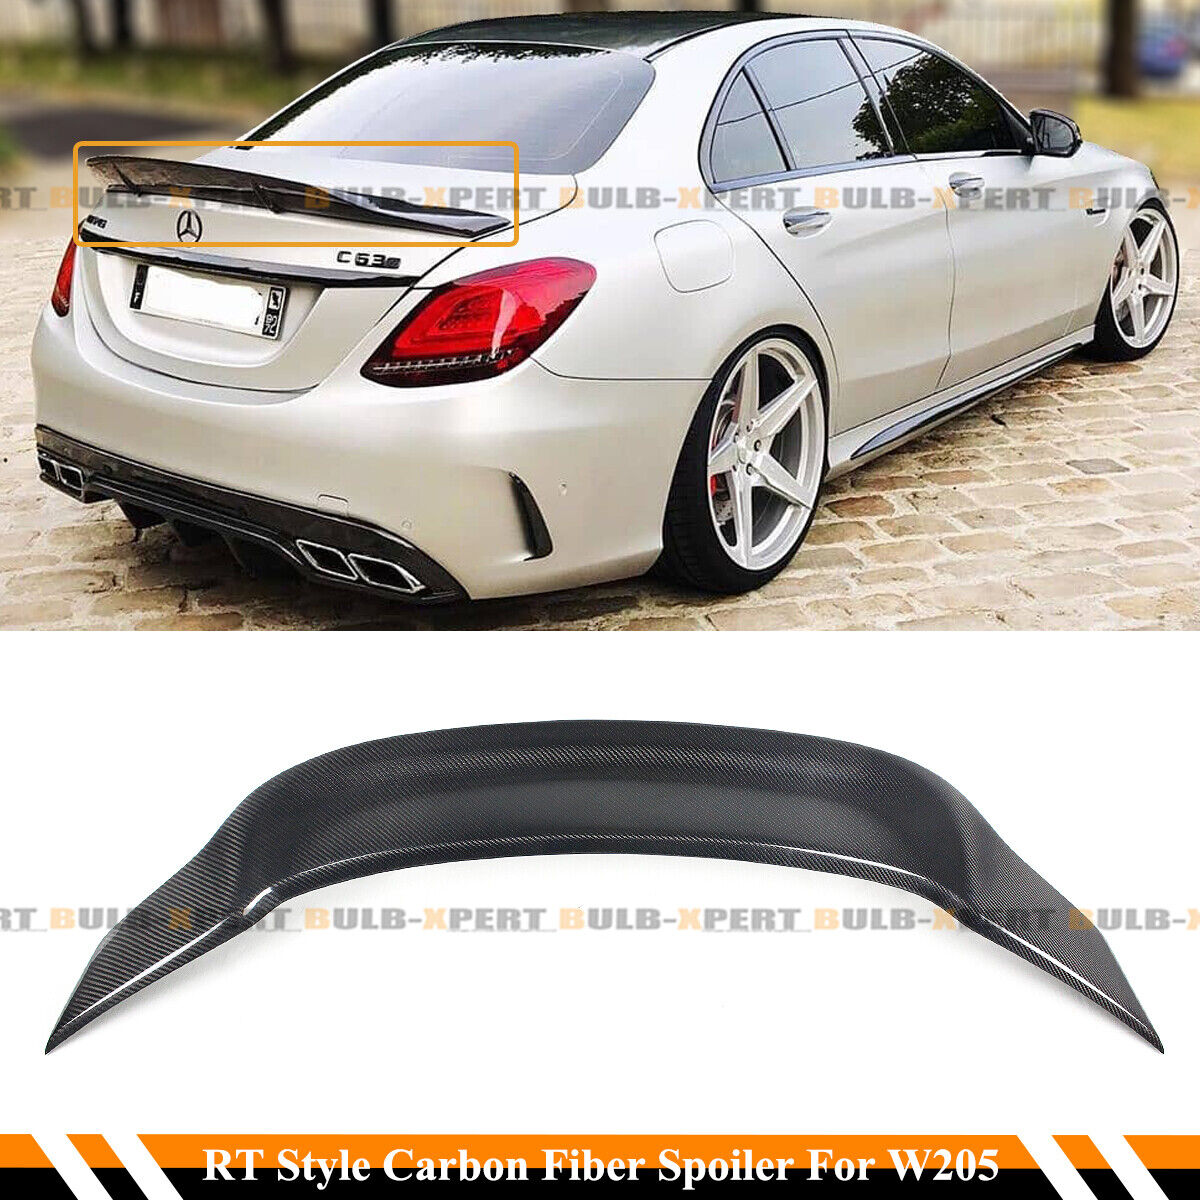 FOR 2015-2021 MERCEDES BENZ W205 C63 AMG R STYLE CARBON FIBER TRUNK SPOILER WING